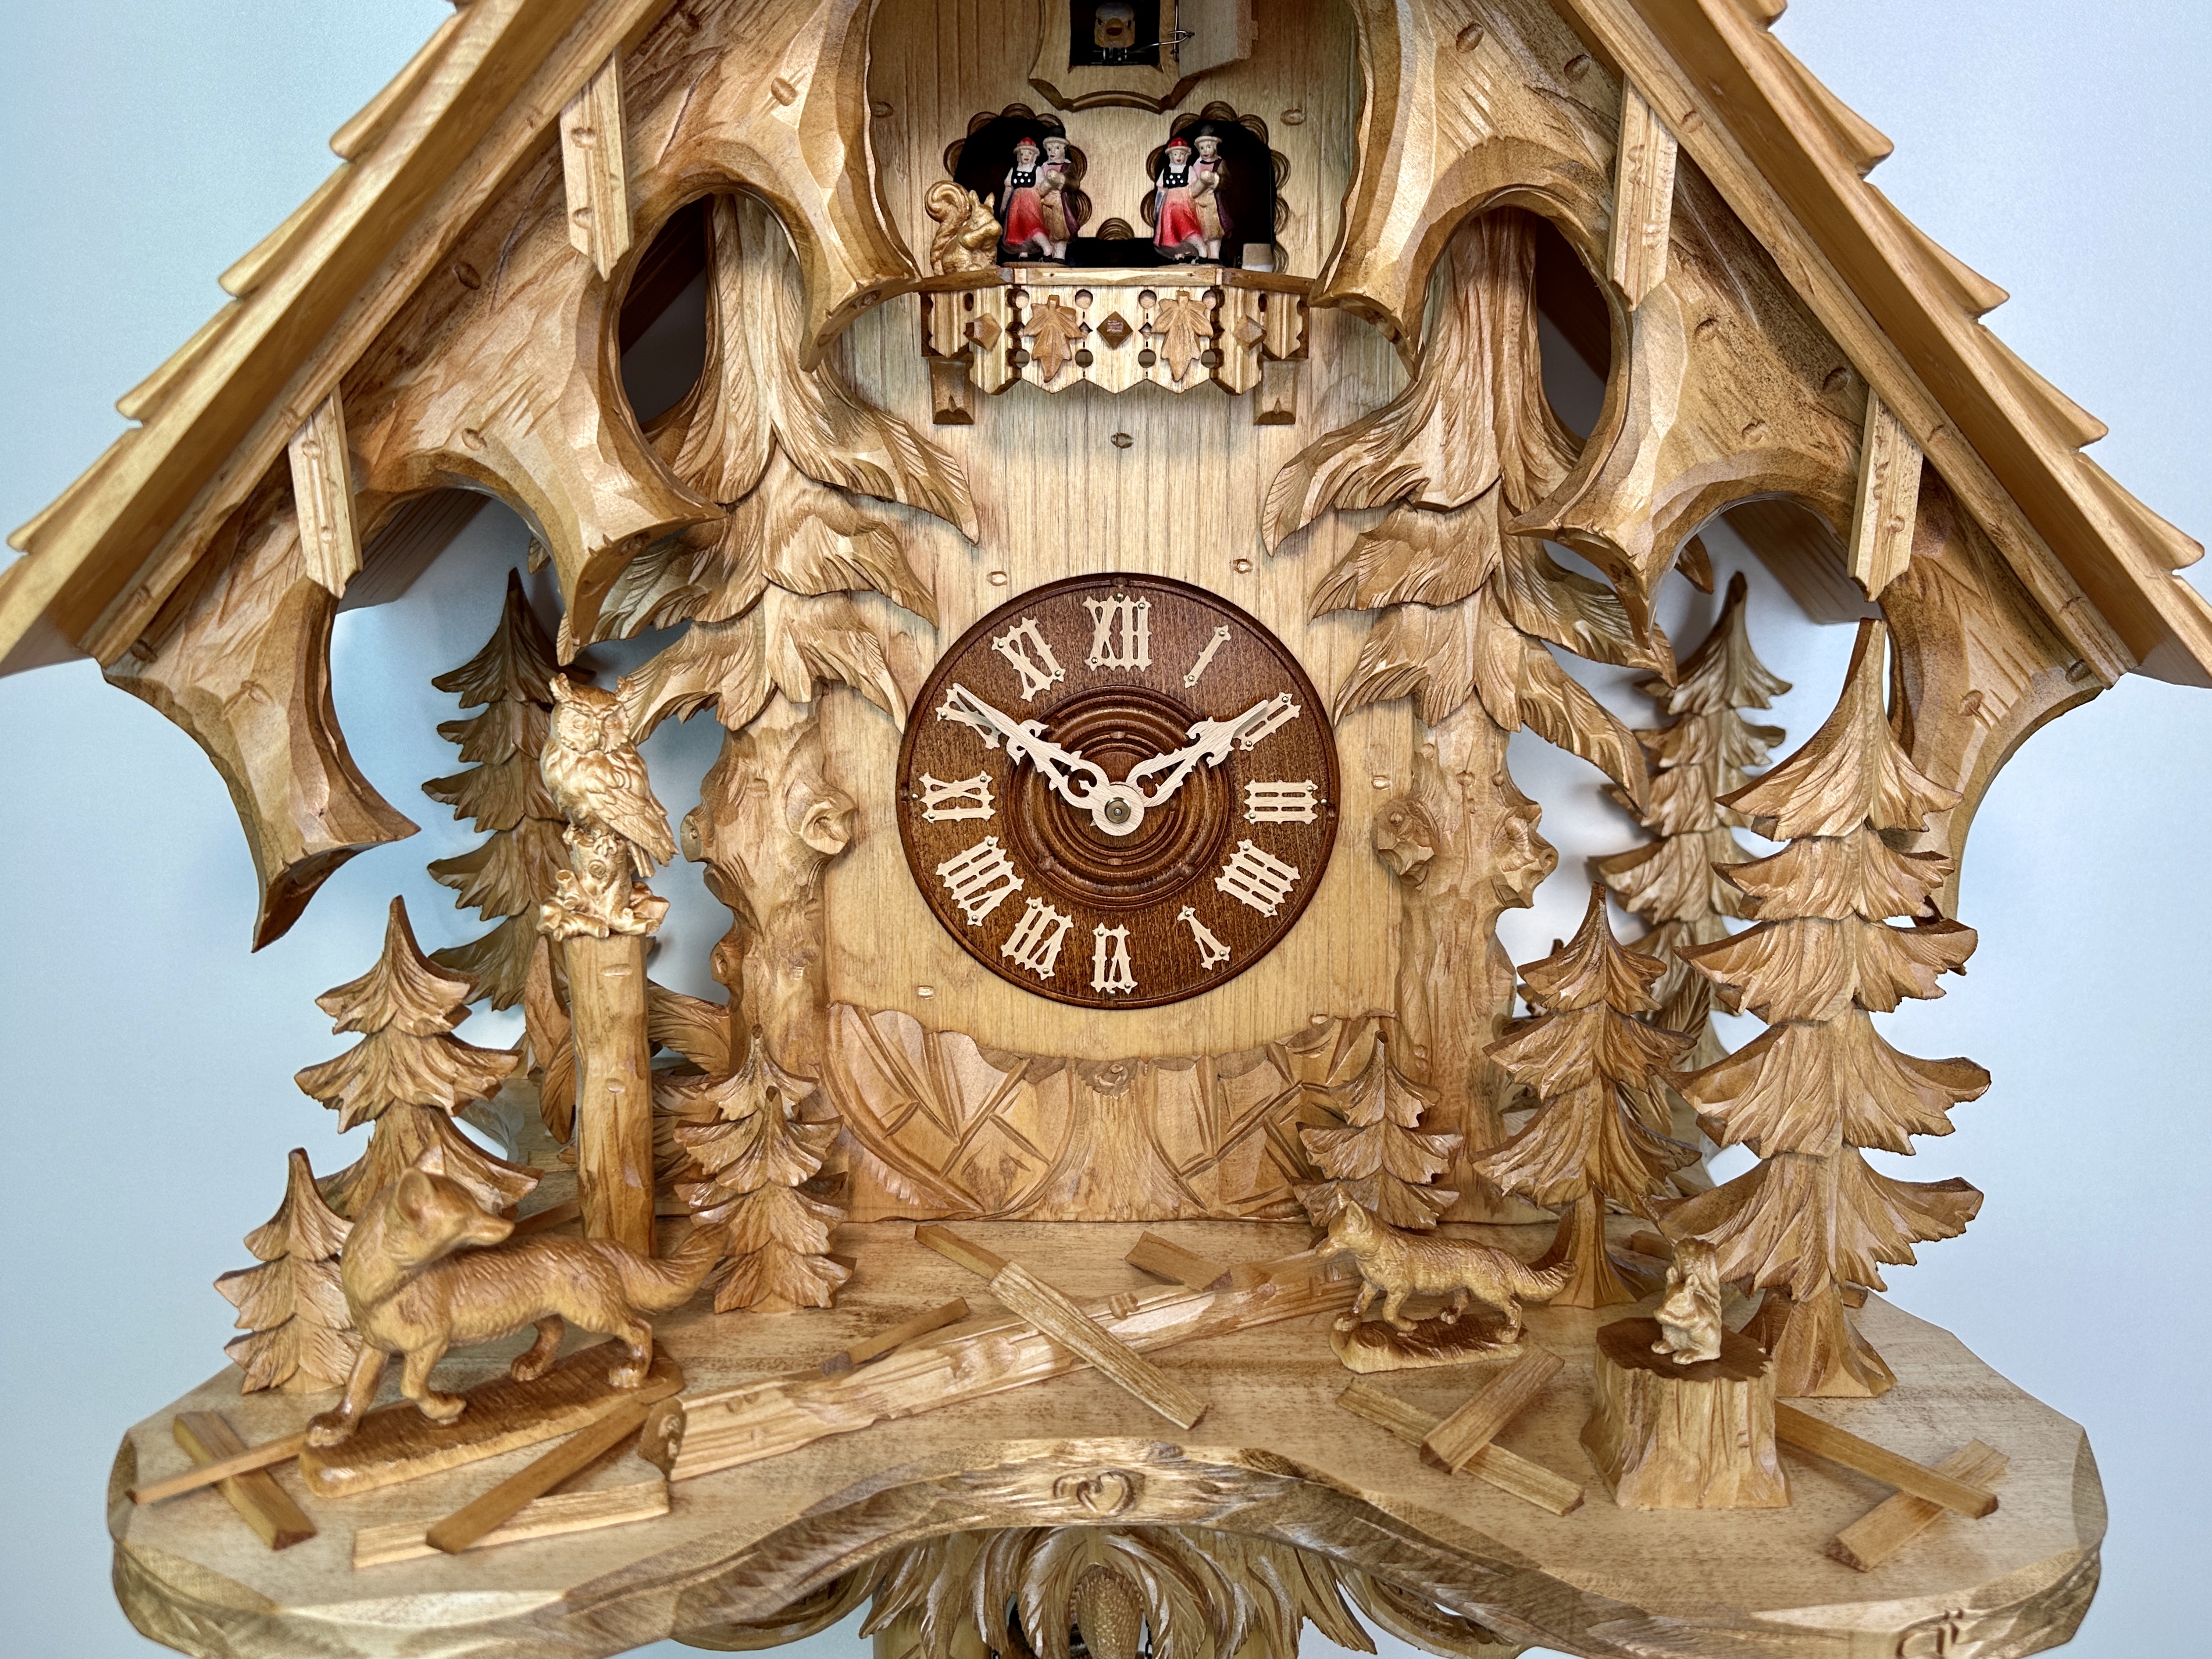 8 Days Music Dancer  Cuckoo Clock Black Forest House with fox family